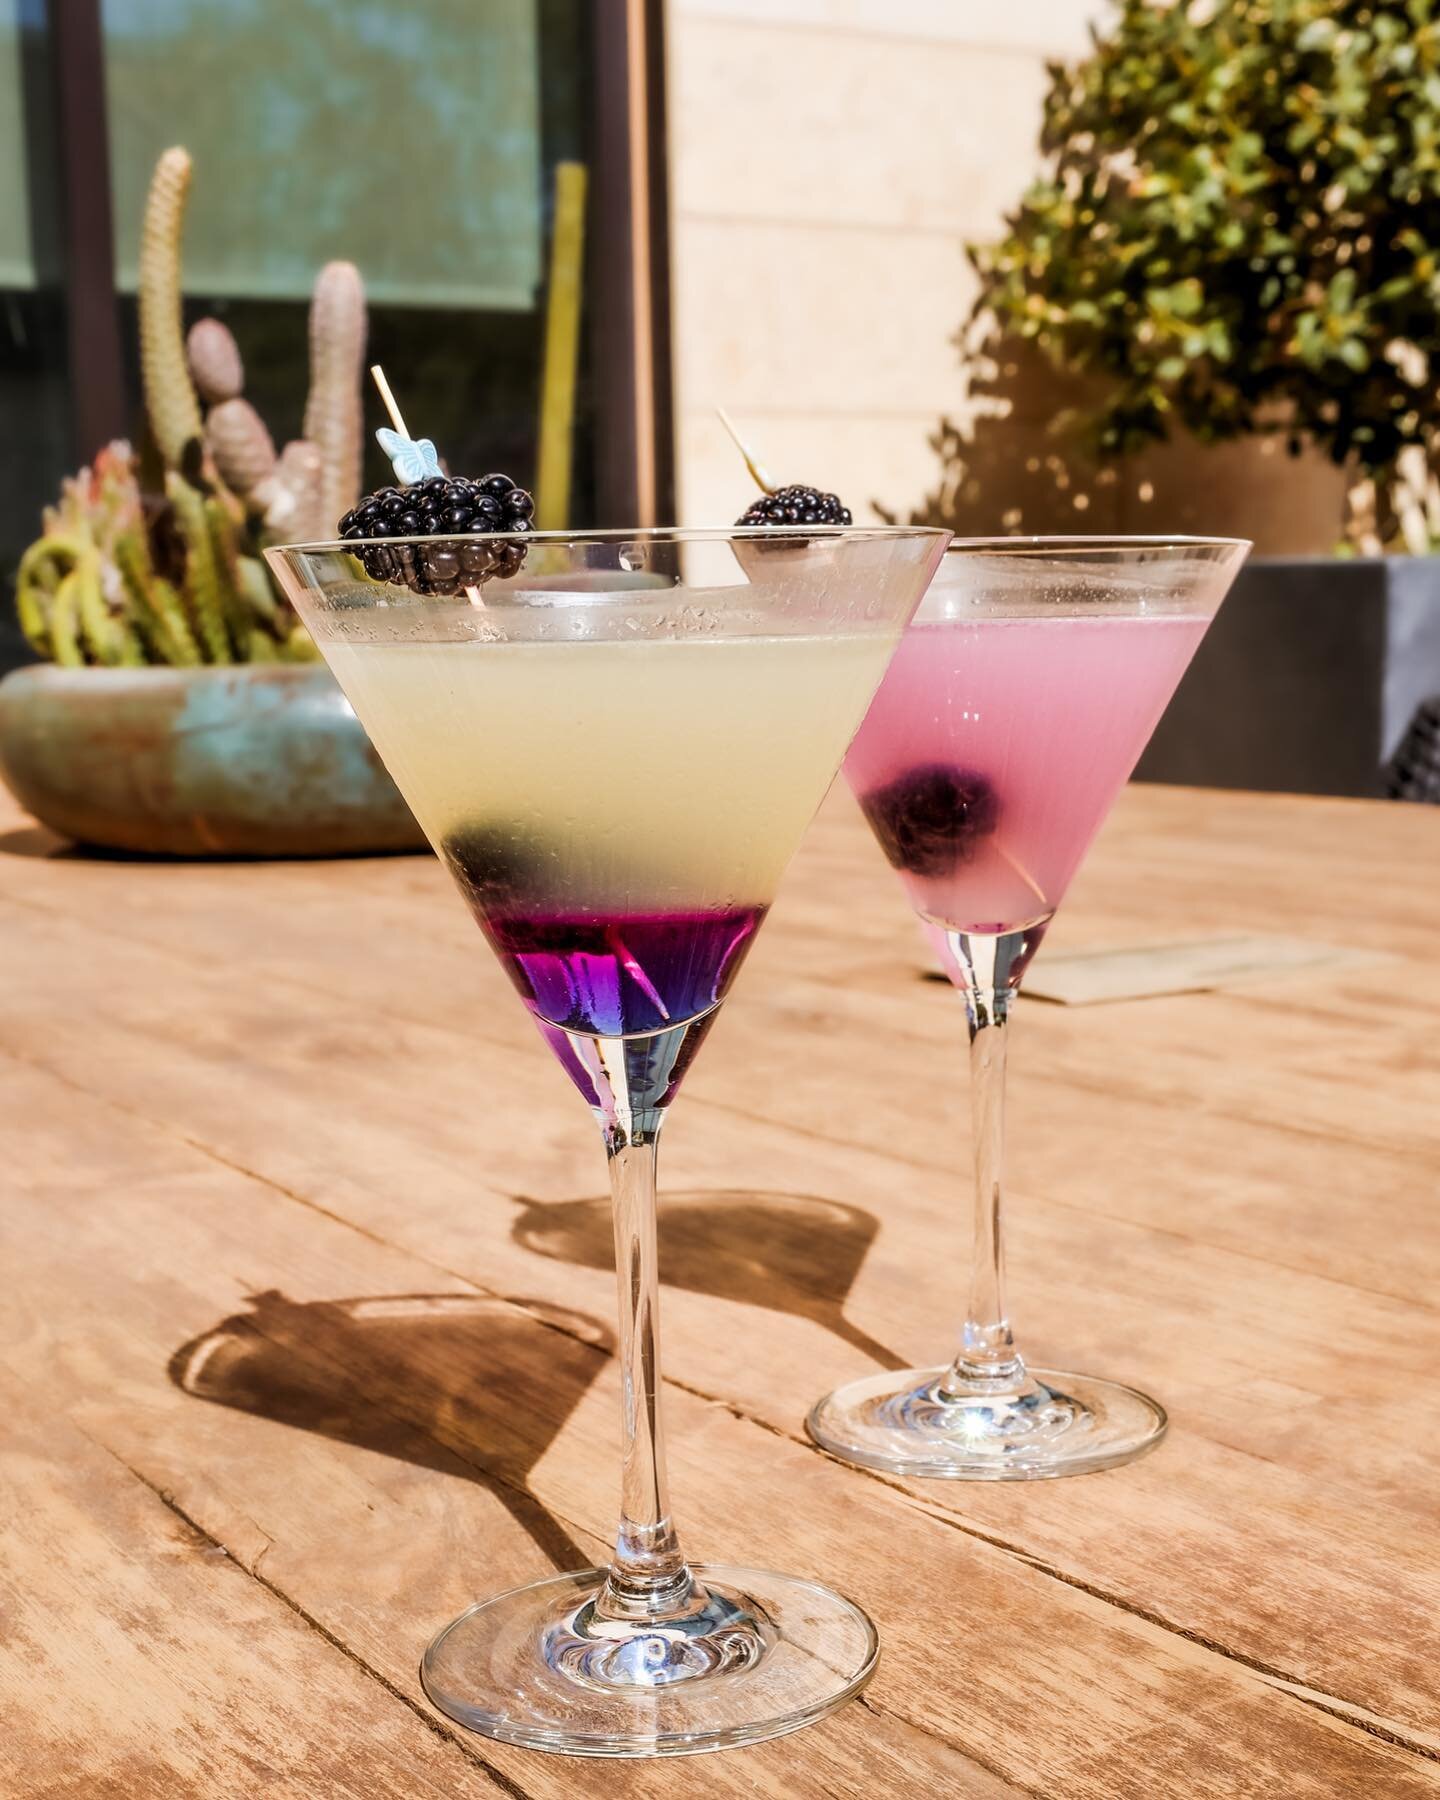 Unwind from a busy week with our Butterfly Kiss Martini at the White Buffalo Bar 🍸